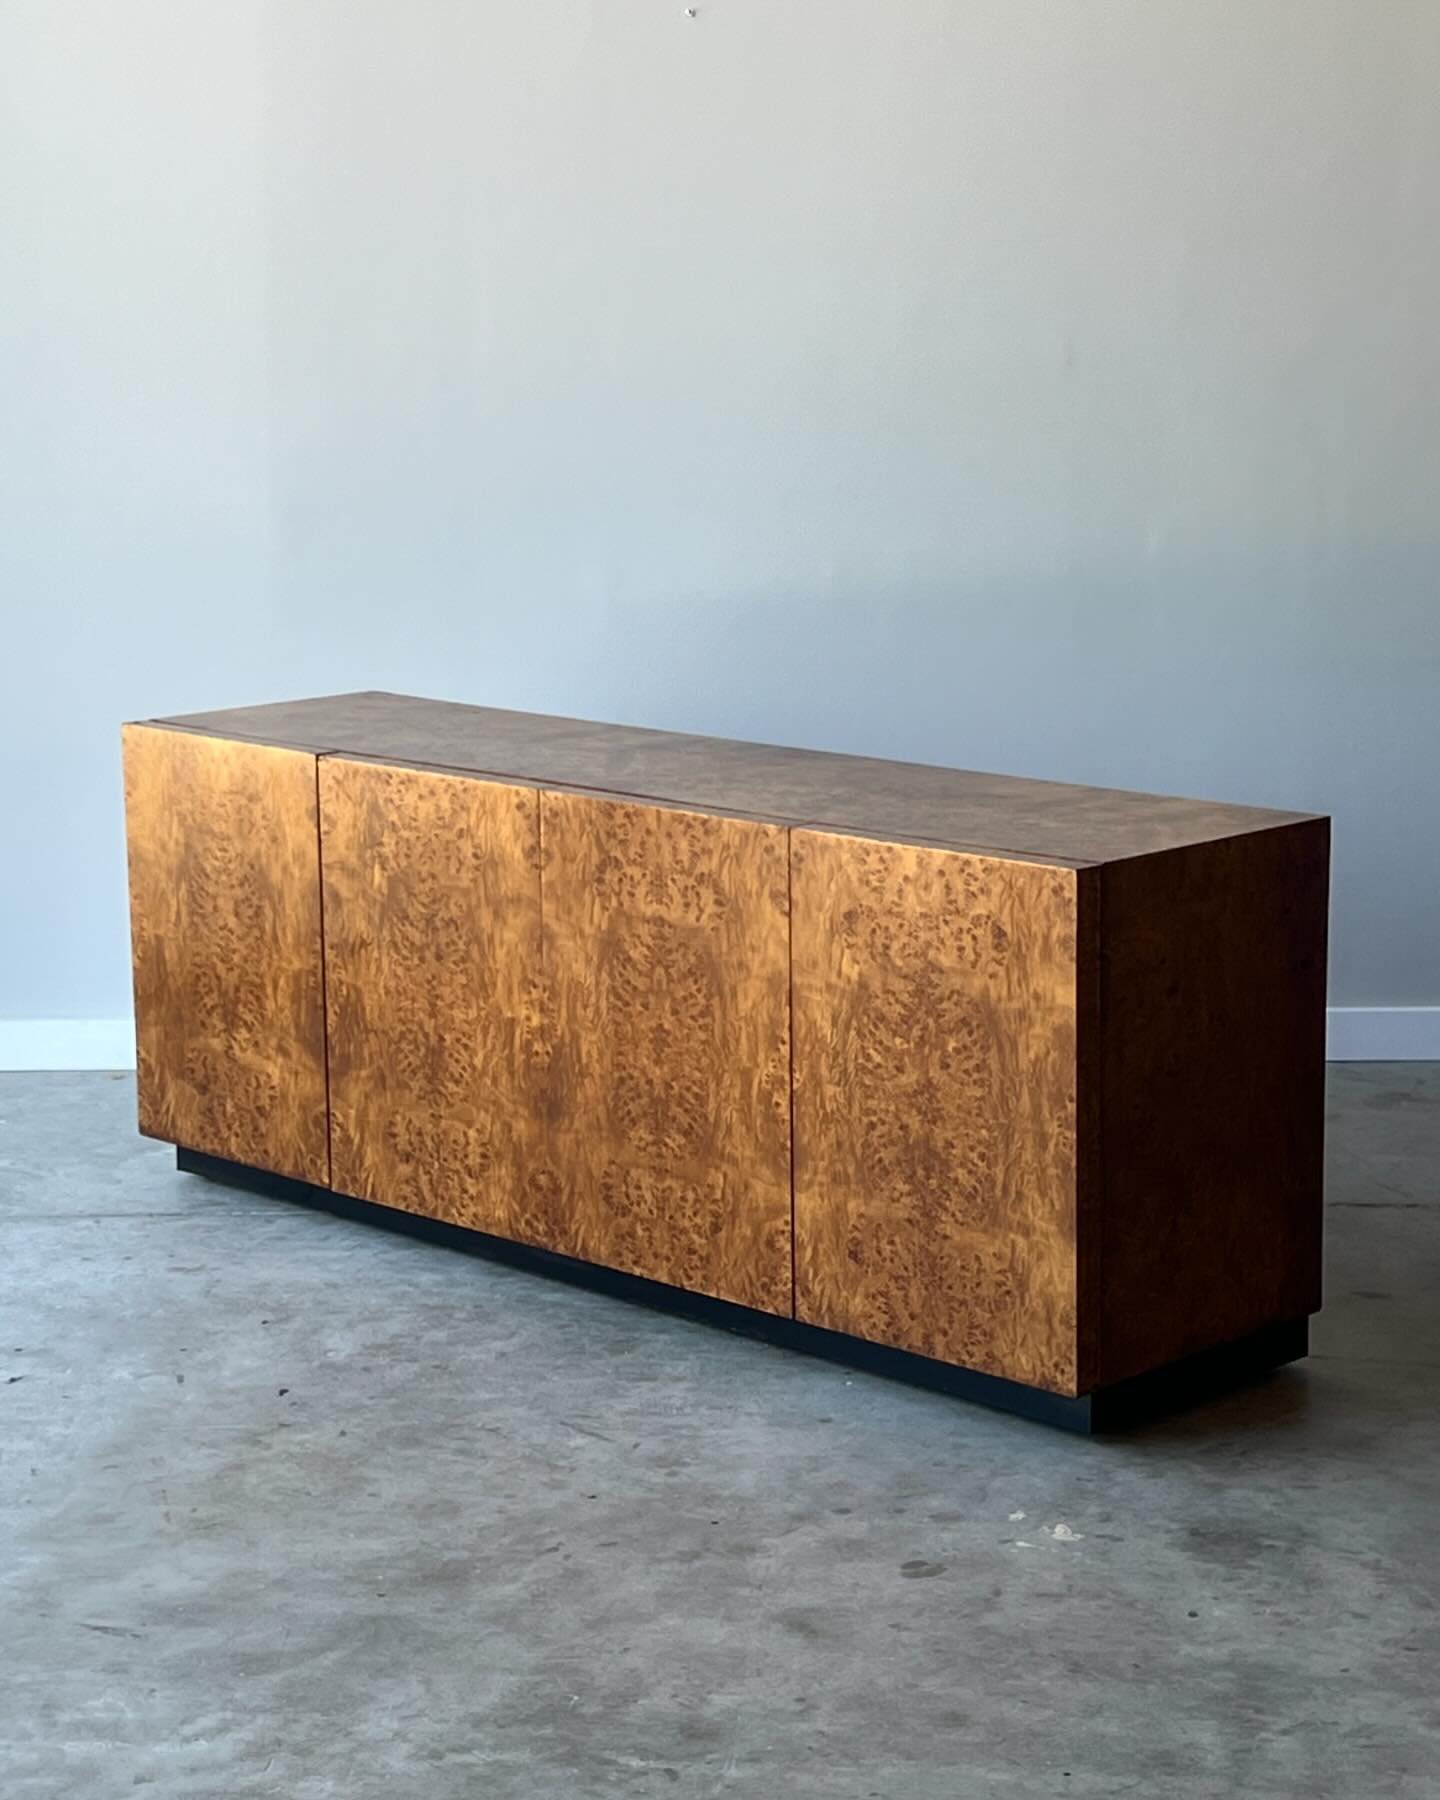 SOLD ~ Mid-century burl wood credenza or sideboard. This stunner was made by Dillingham in the style of Milo Baughman. It&rsquo;s not often we offer burl wood items and if we had a bigger house, this one would be coming home with us. This gorgeous pi